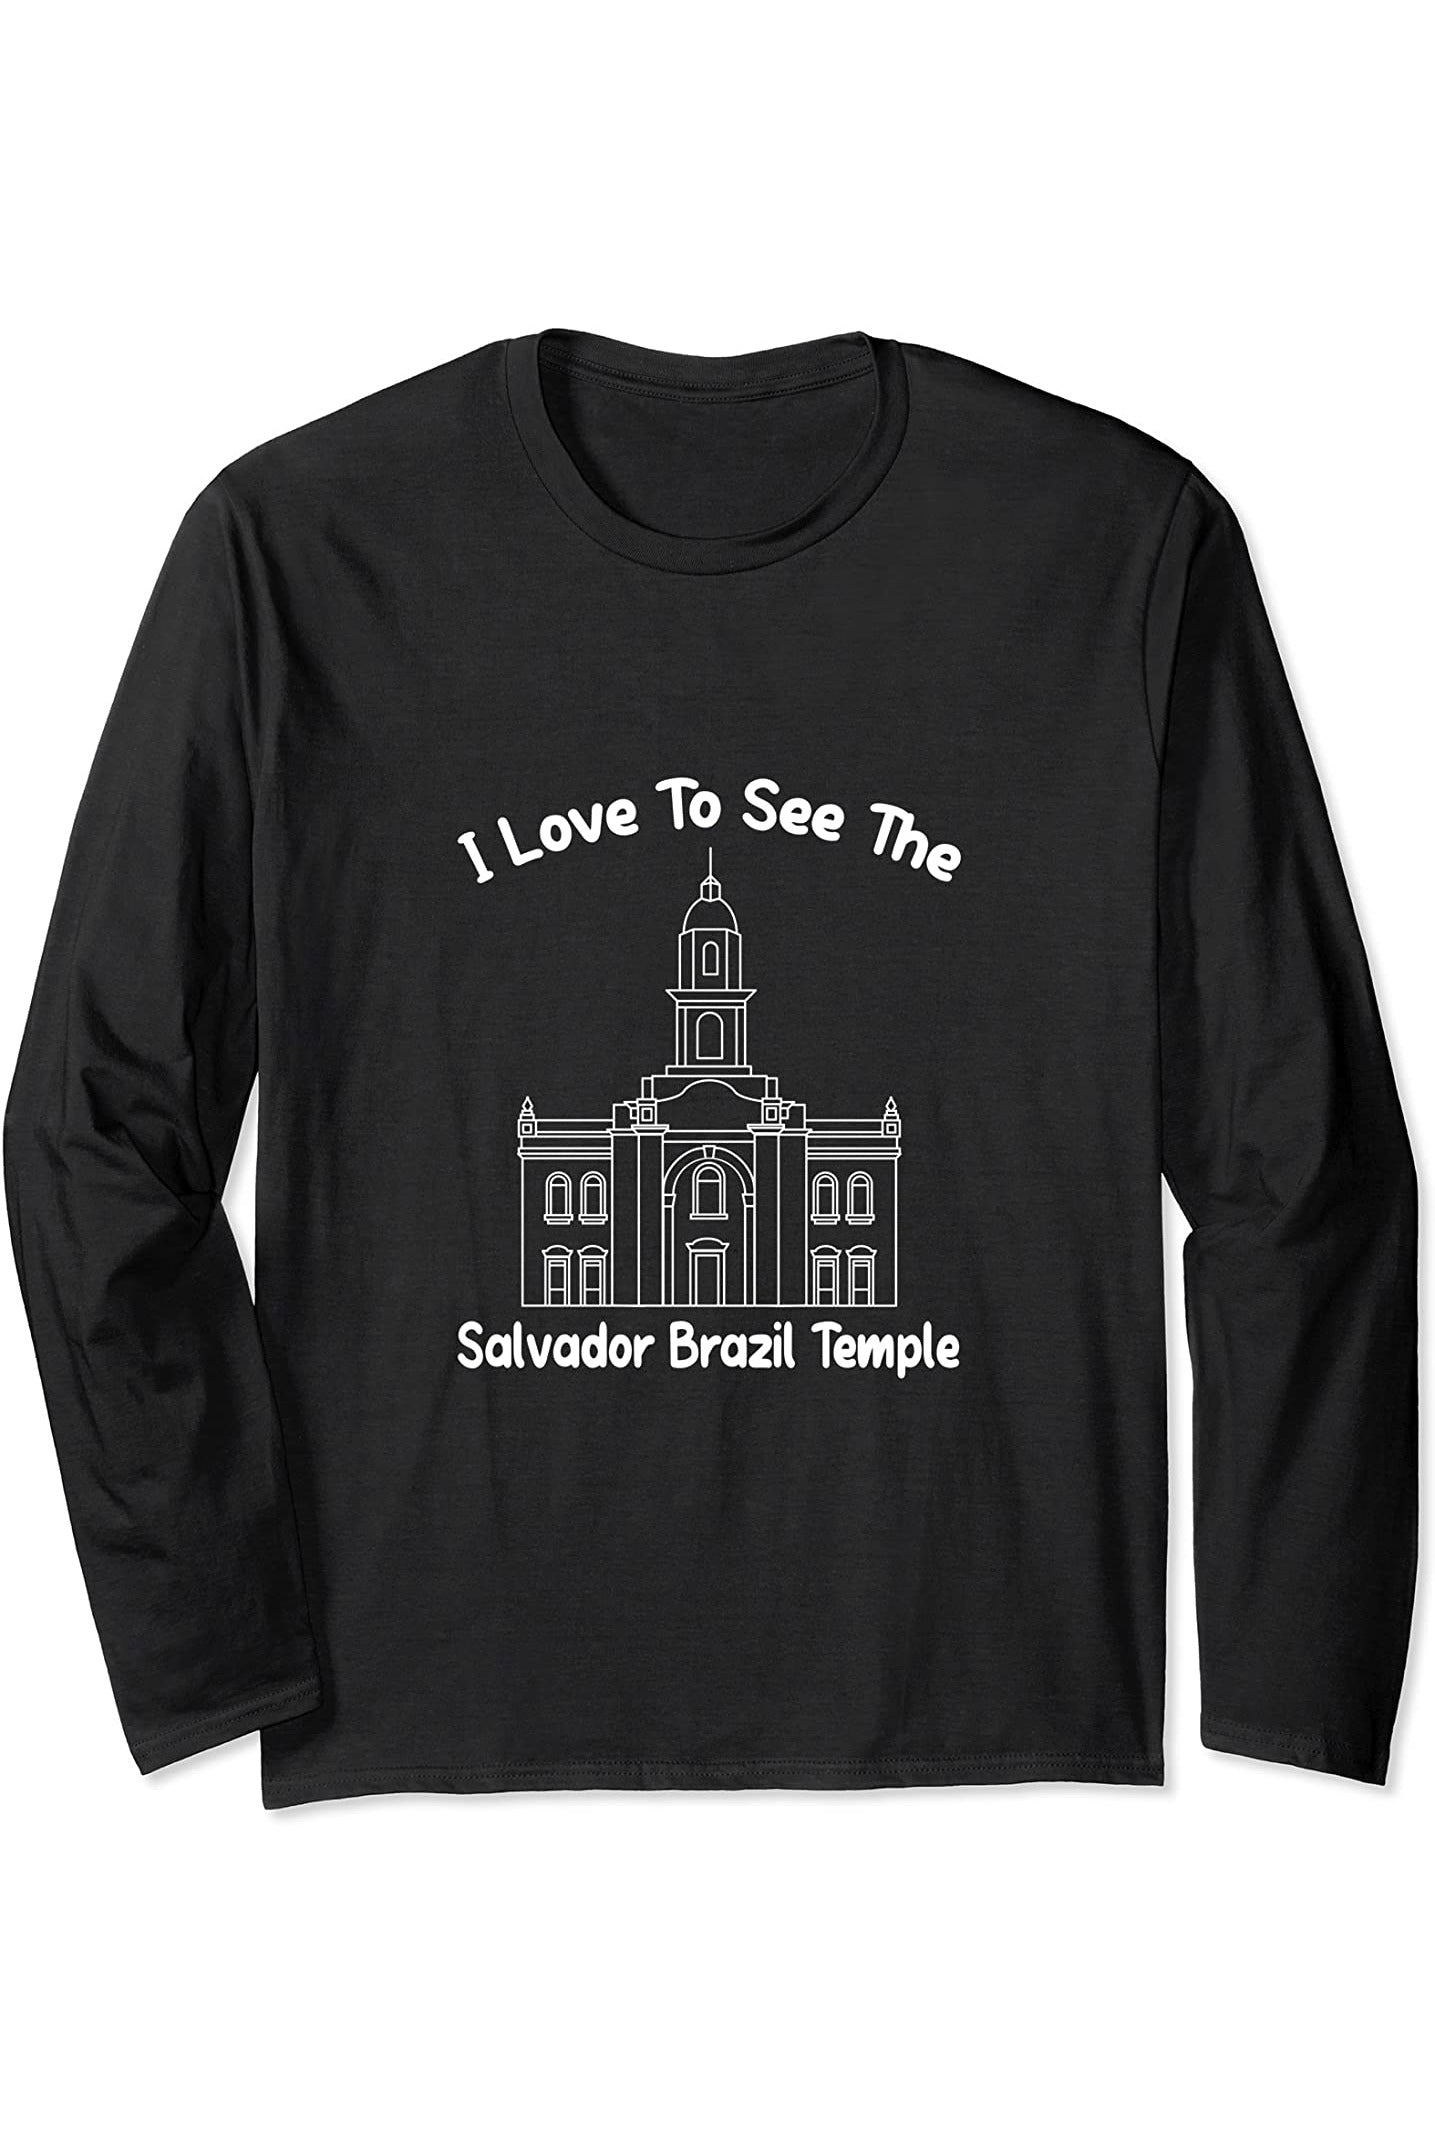 Salvador Brazil Temple Long Sleeve T-Shirt - Primary Style (English) US